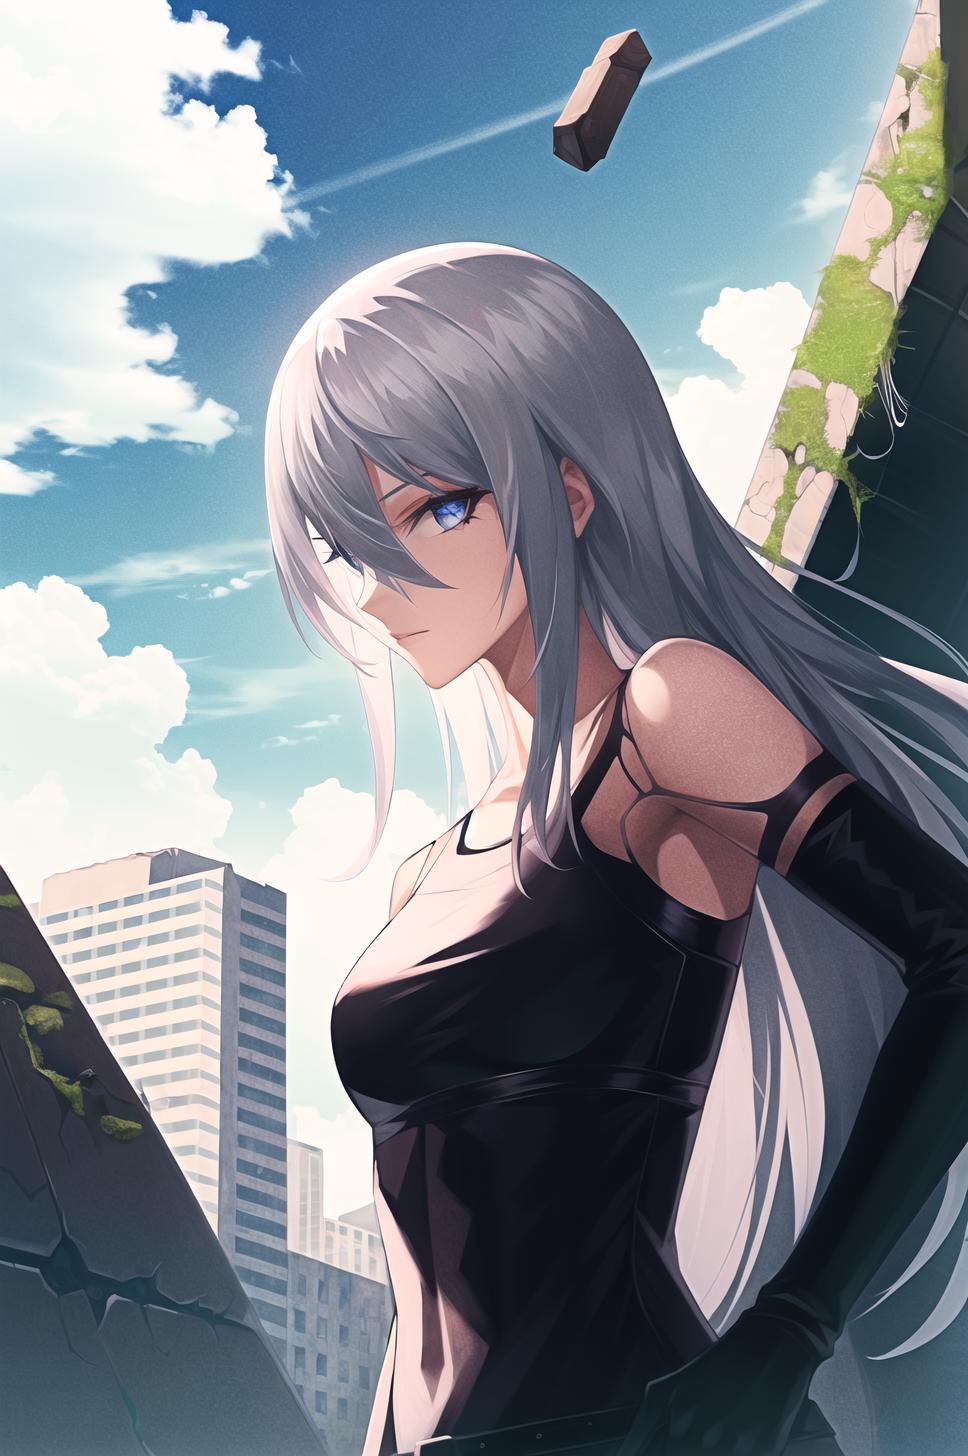 Nier Automata Beautiful Art Wallpapers - Sexy Anime Wallpapers HD